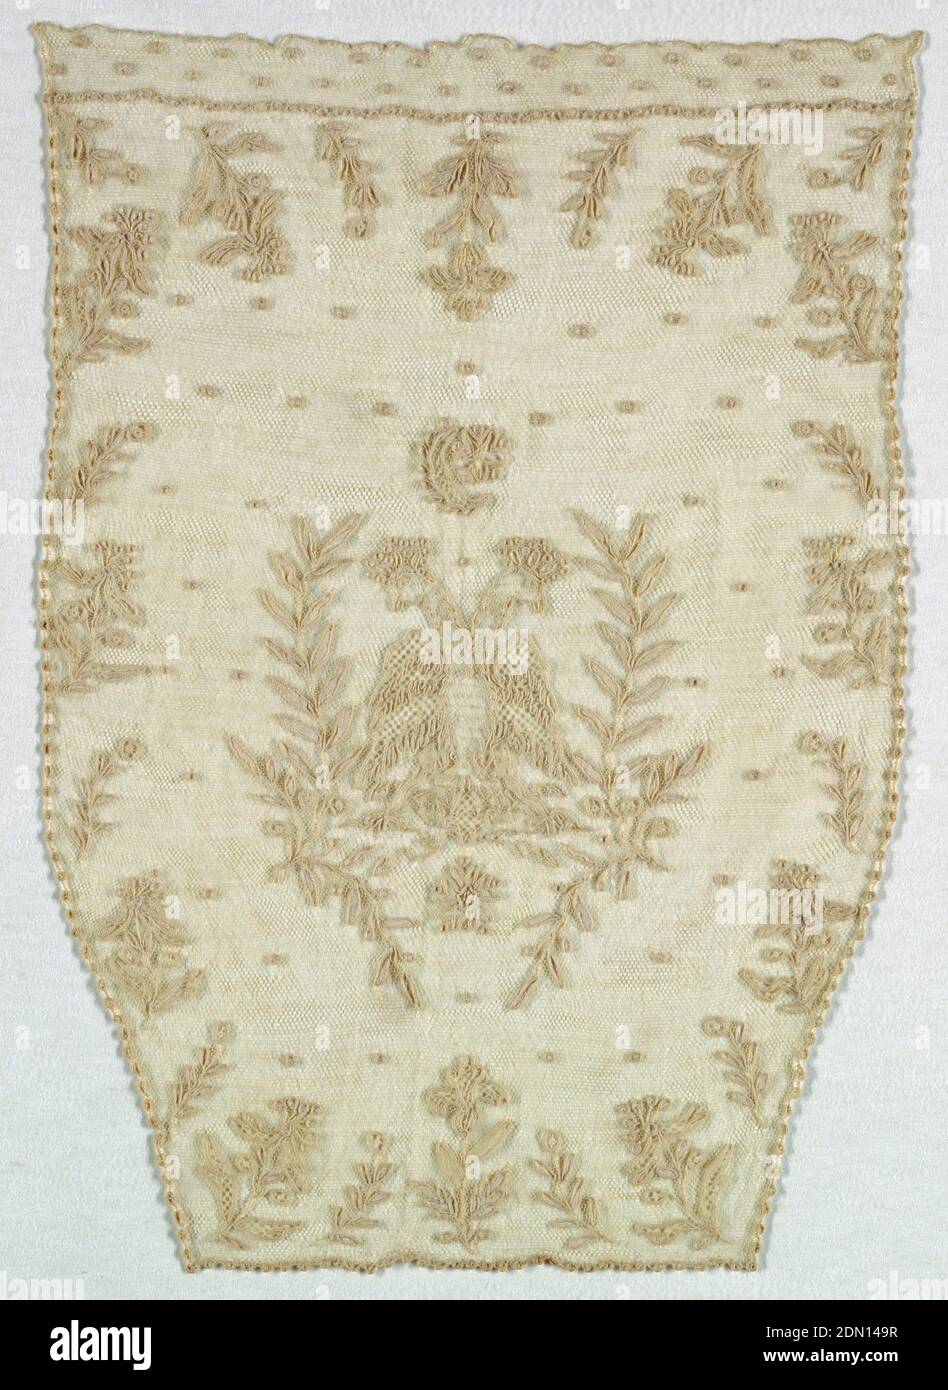 Bag face, Medium: linen Technique: needle lace with a ground of loop & twist with a twist return, Shield-shaped face of a bag, with a central figure of a double headed eagle flanked by olive branches and a border of floral branches., Alençon, France, ca. 1810, lace, Bag face Stock Photo